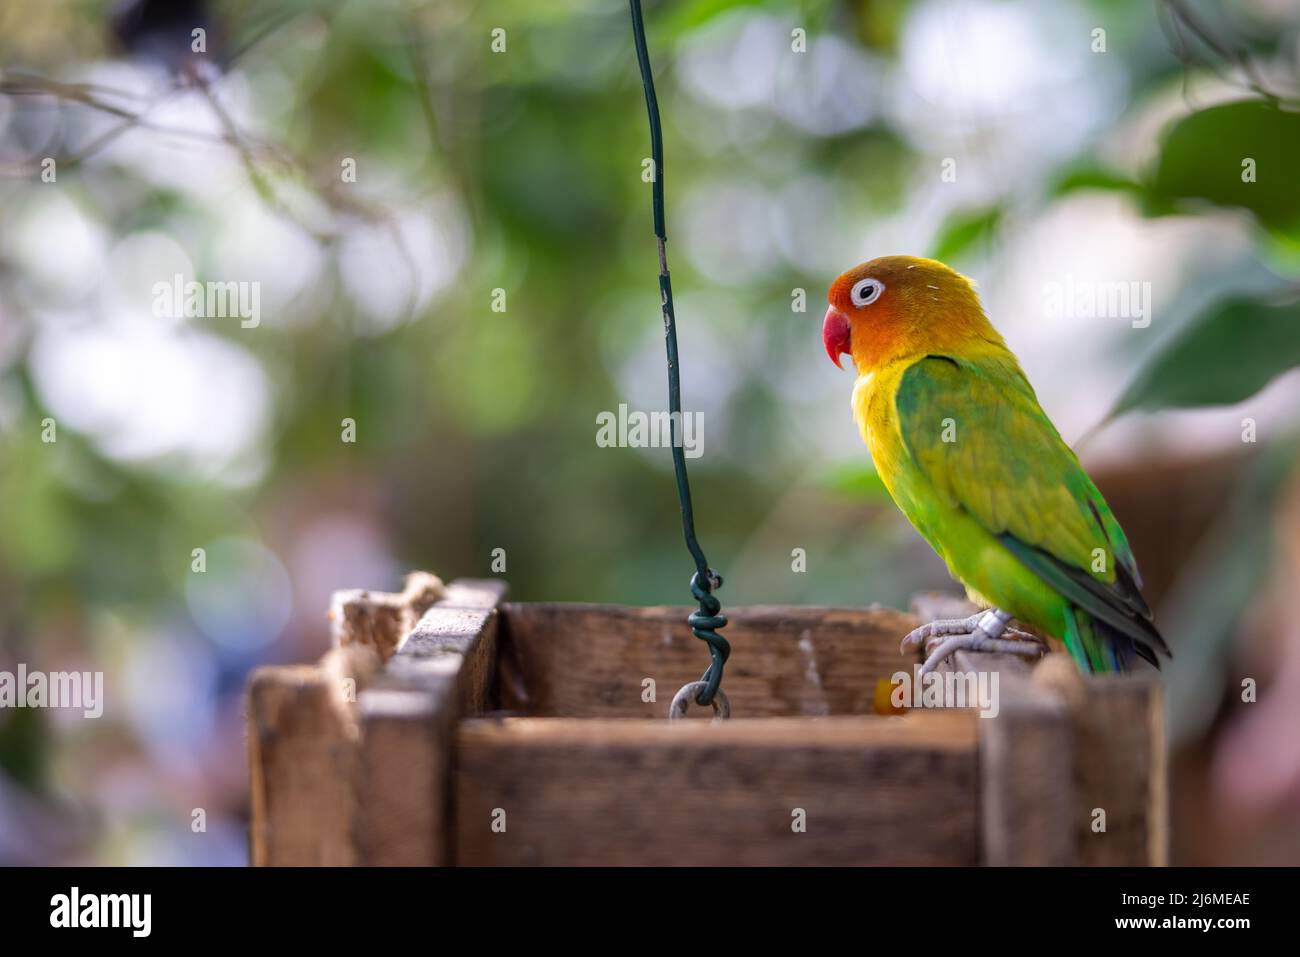 Closeup of a colorful lovebird parrot perched on a wooden box and surrounded by vegetation Stock Photo